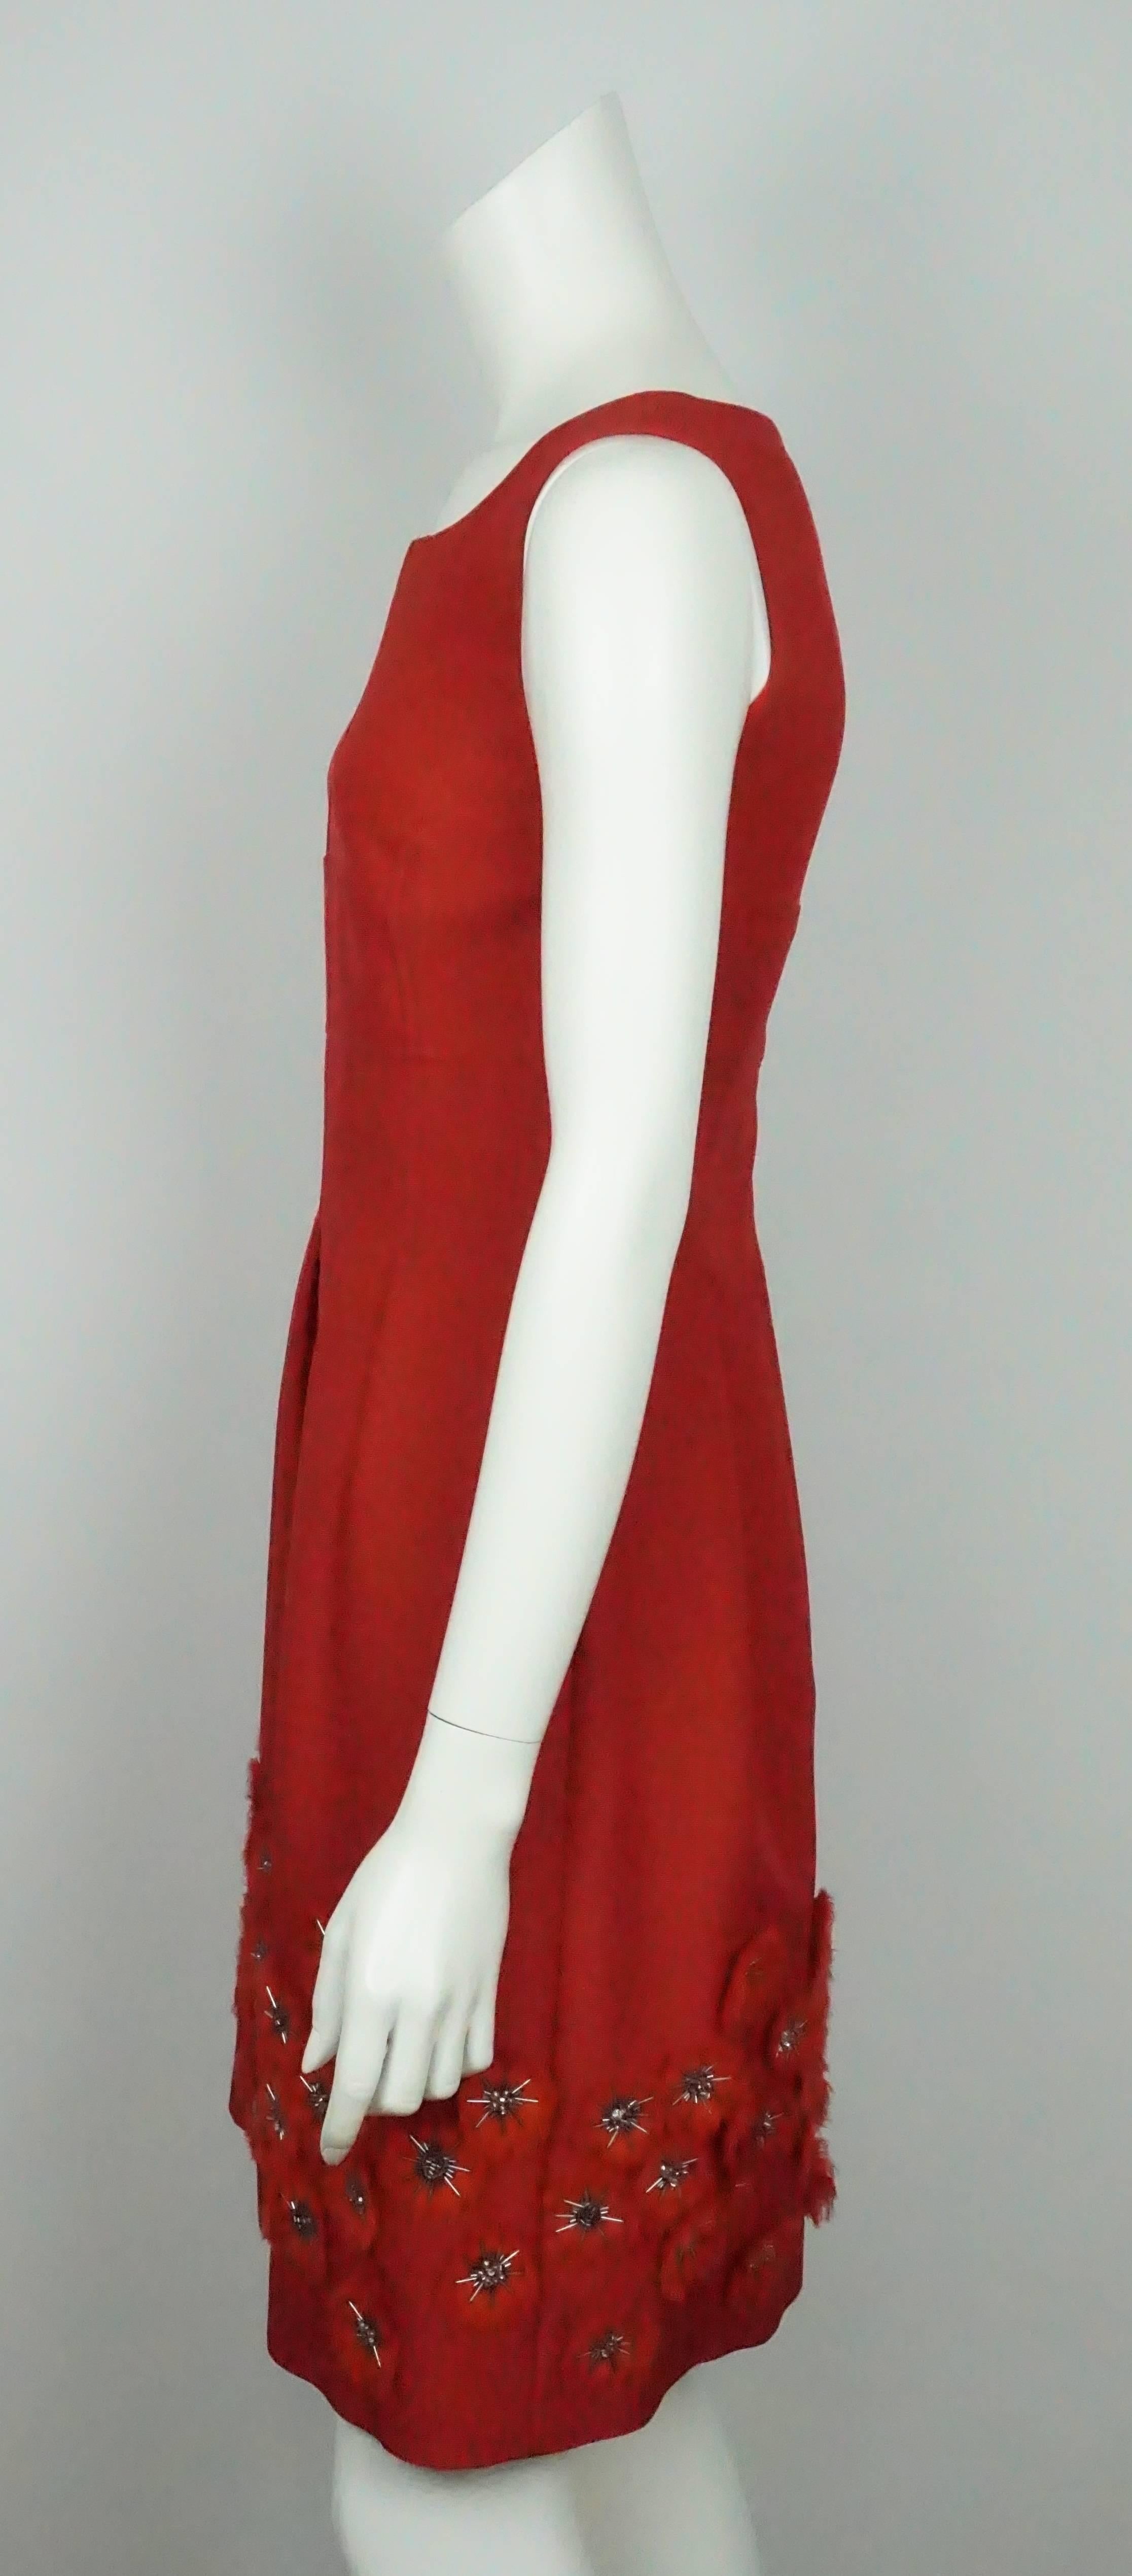 Lela Rose Red Silk Dress w/ Appliques - 4  This stunning nylon and silk dress is in excellent condition. The dress is sleeveless and sinches in at the waist. The dress has five stitches  around the waist area that creates a pleats around the hip